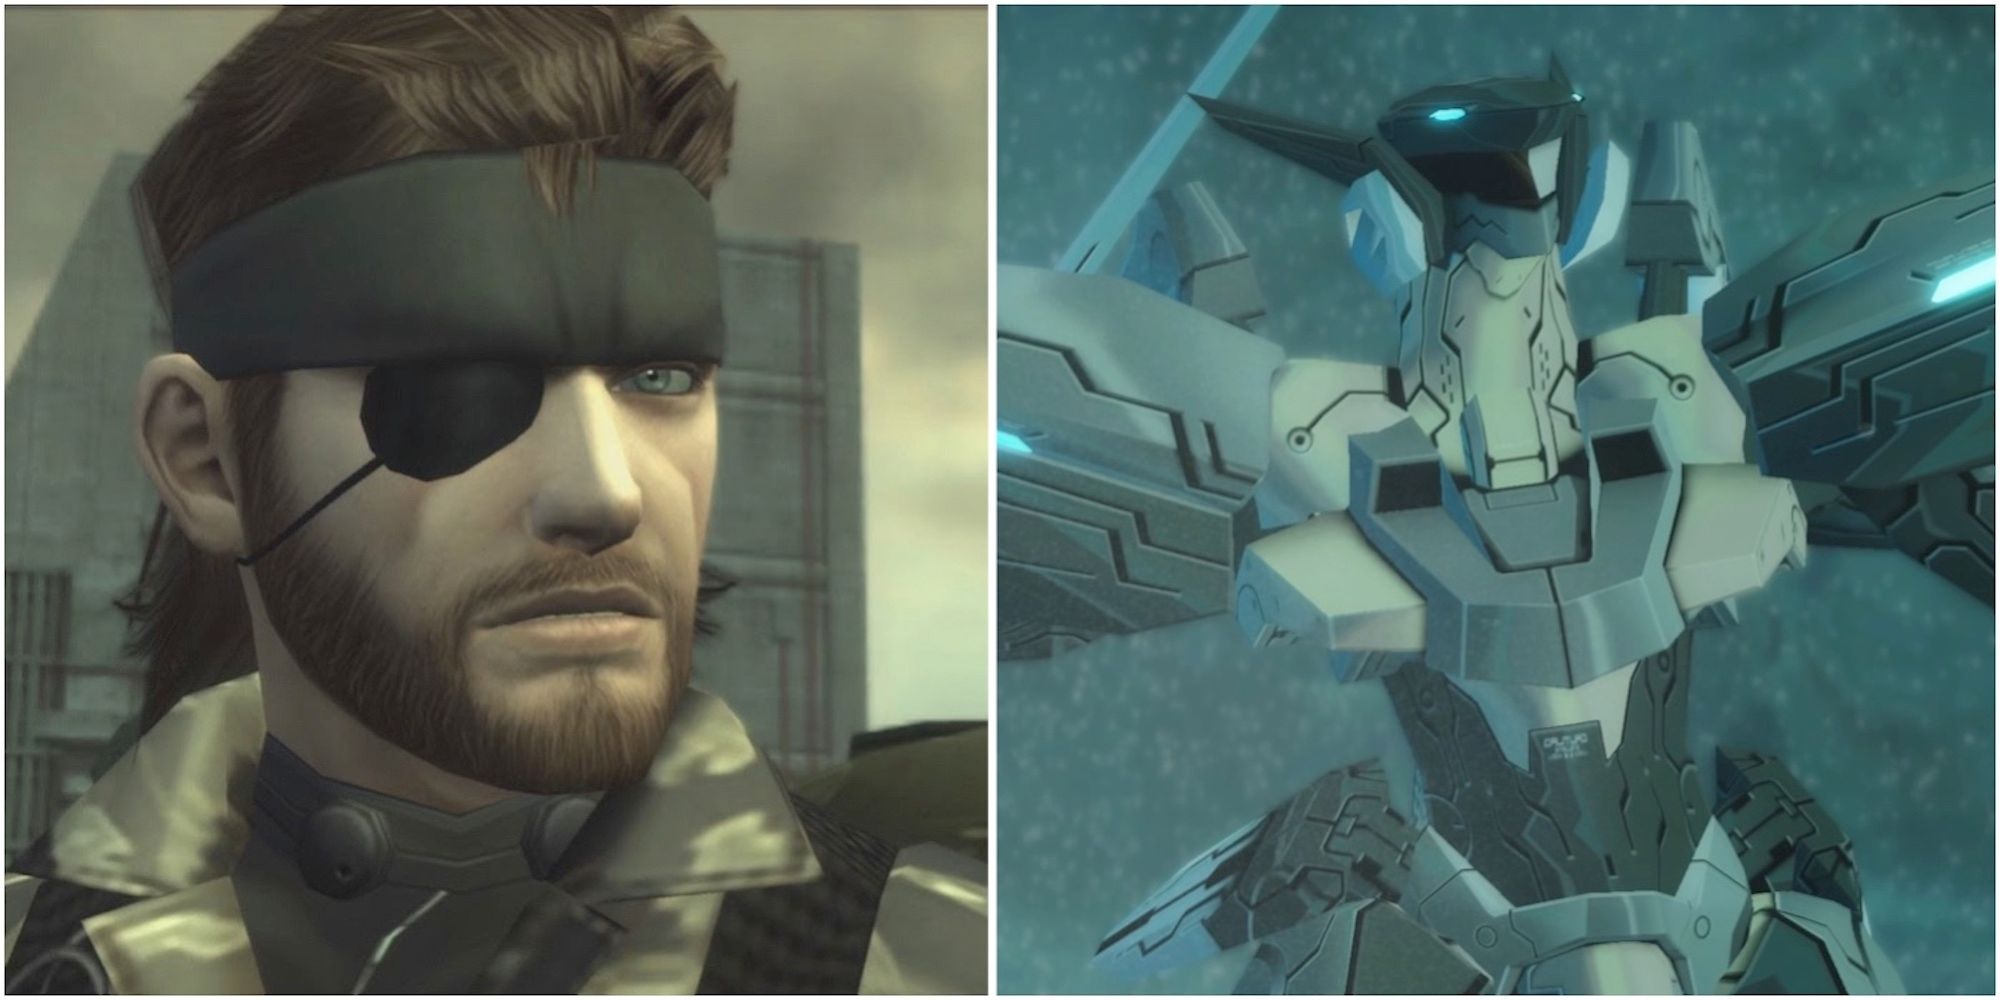 Big Boss in Metal Gear Solid 3 and Jehuty in Zone Of The Enders The Second Runner